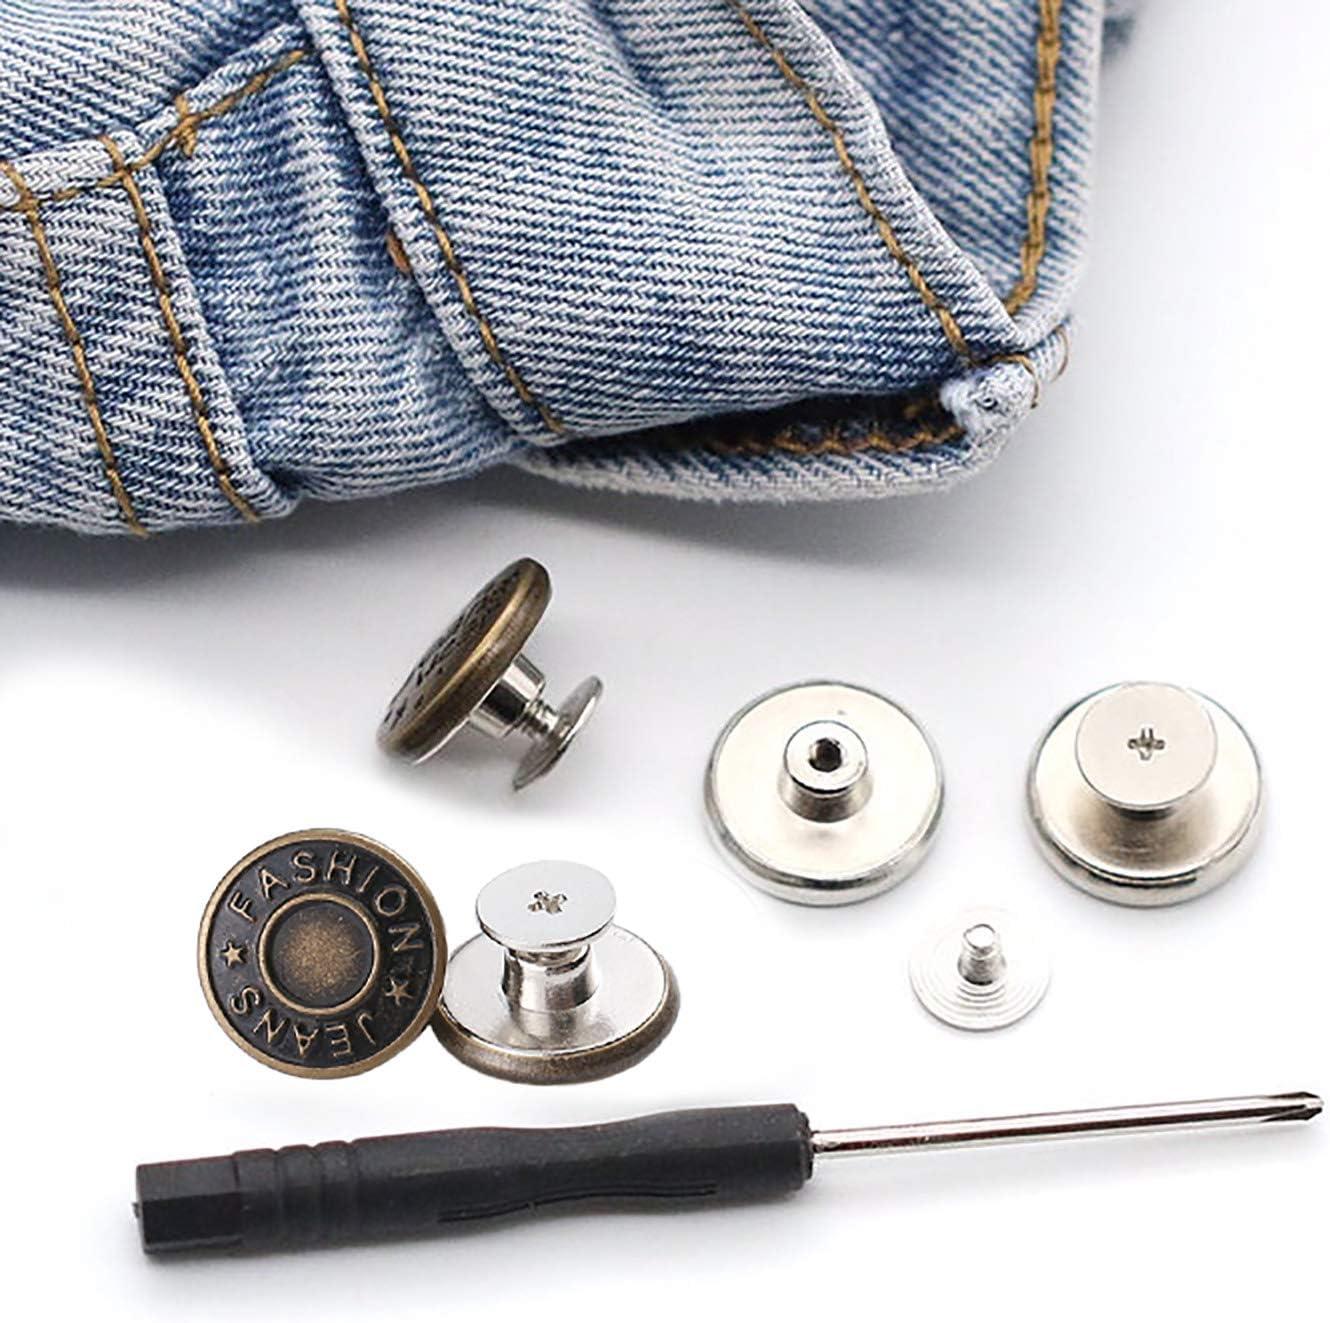 GIYOMI 20mm No Sewing Jeans Buttons Replacement Kit with Metal